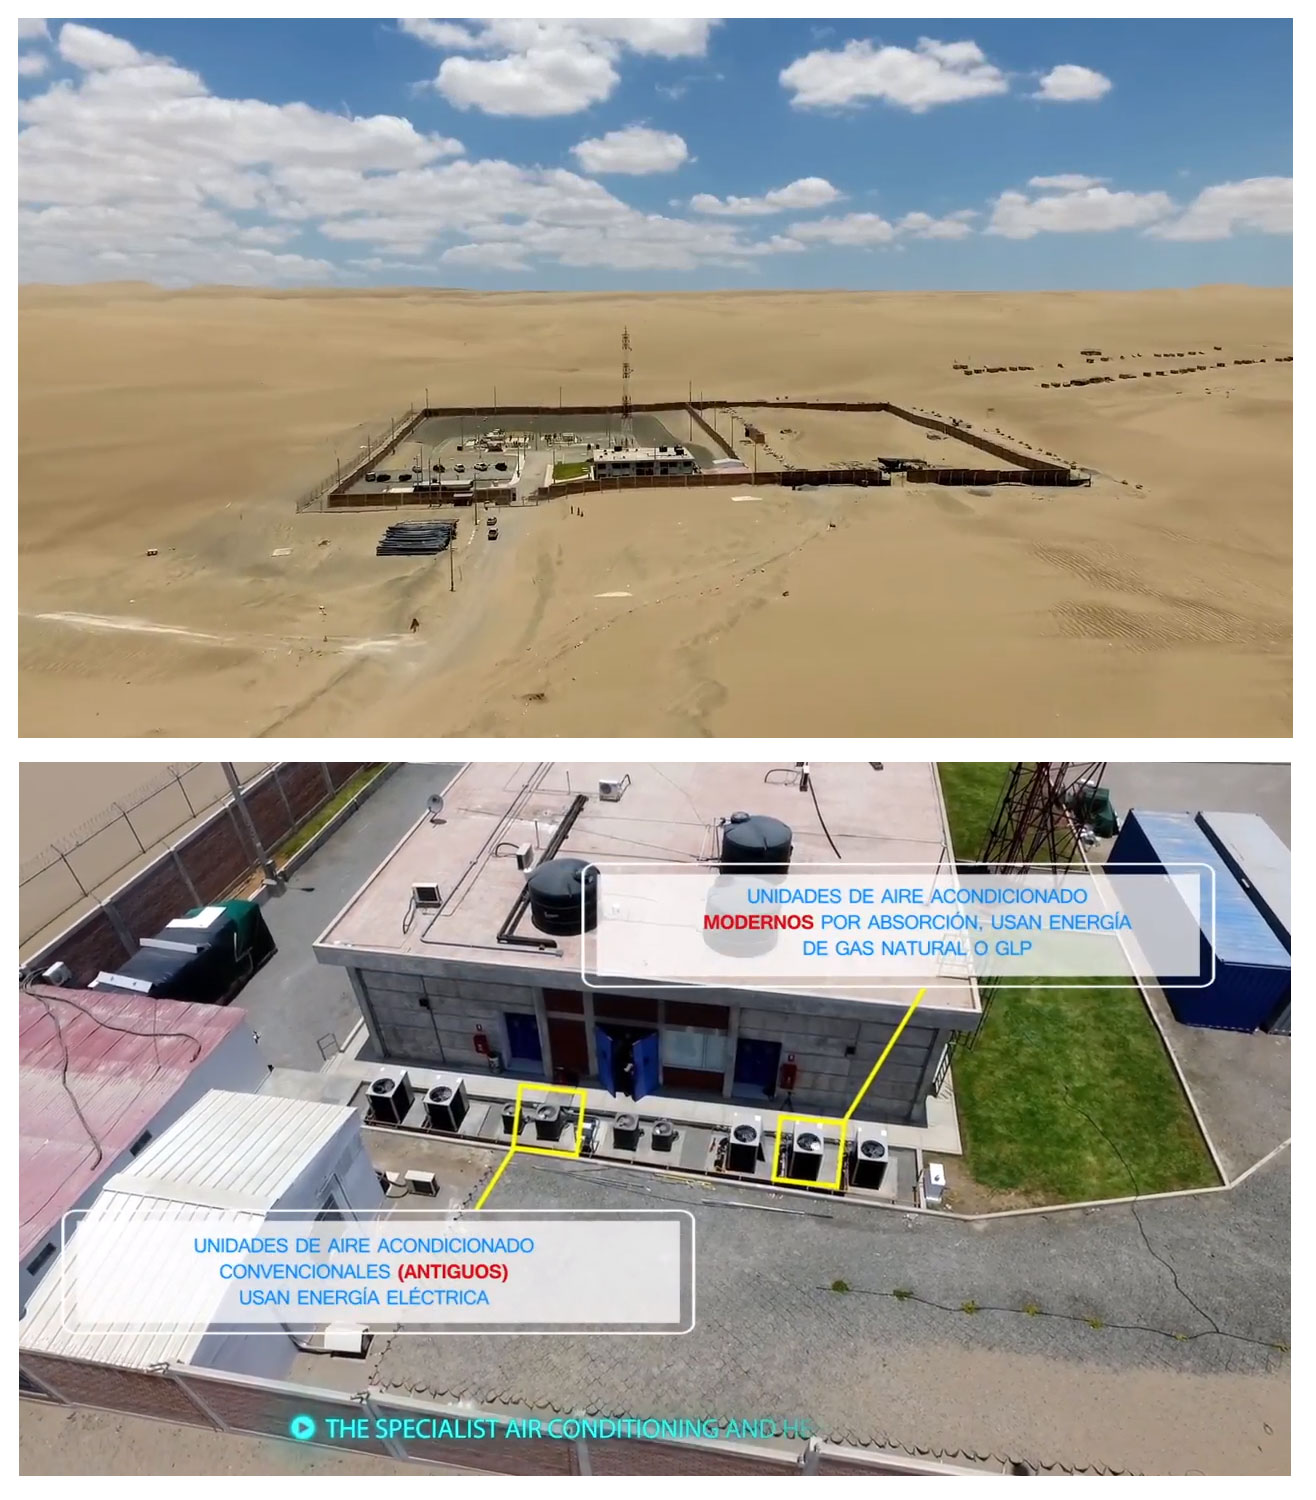 Data center pre-cooling and office air conditioning in the Peruvian desert